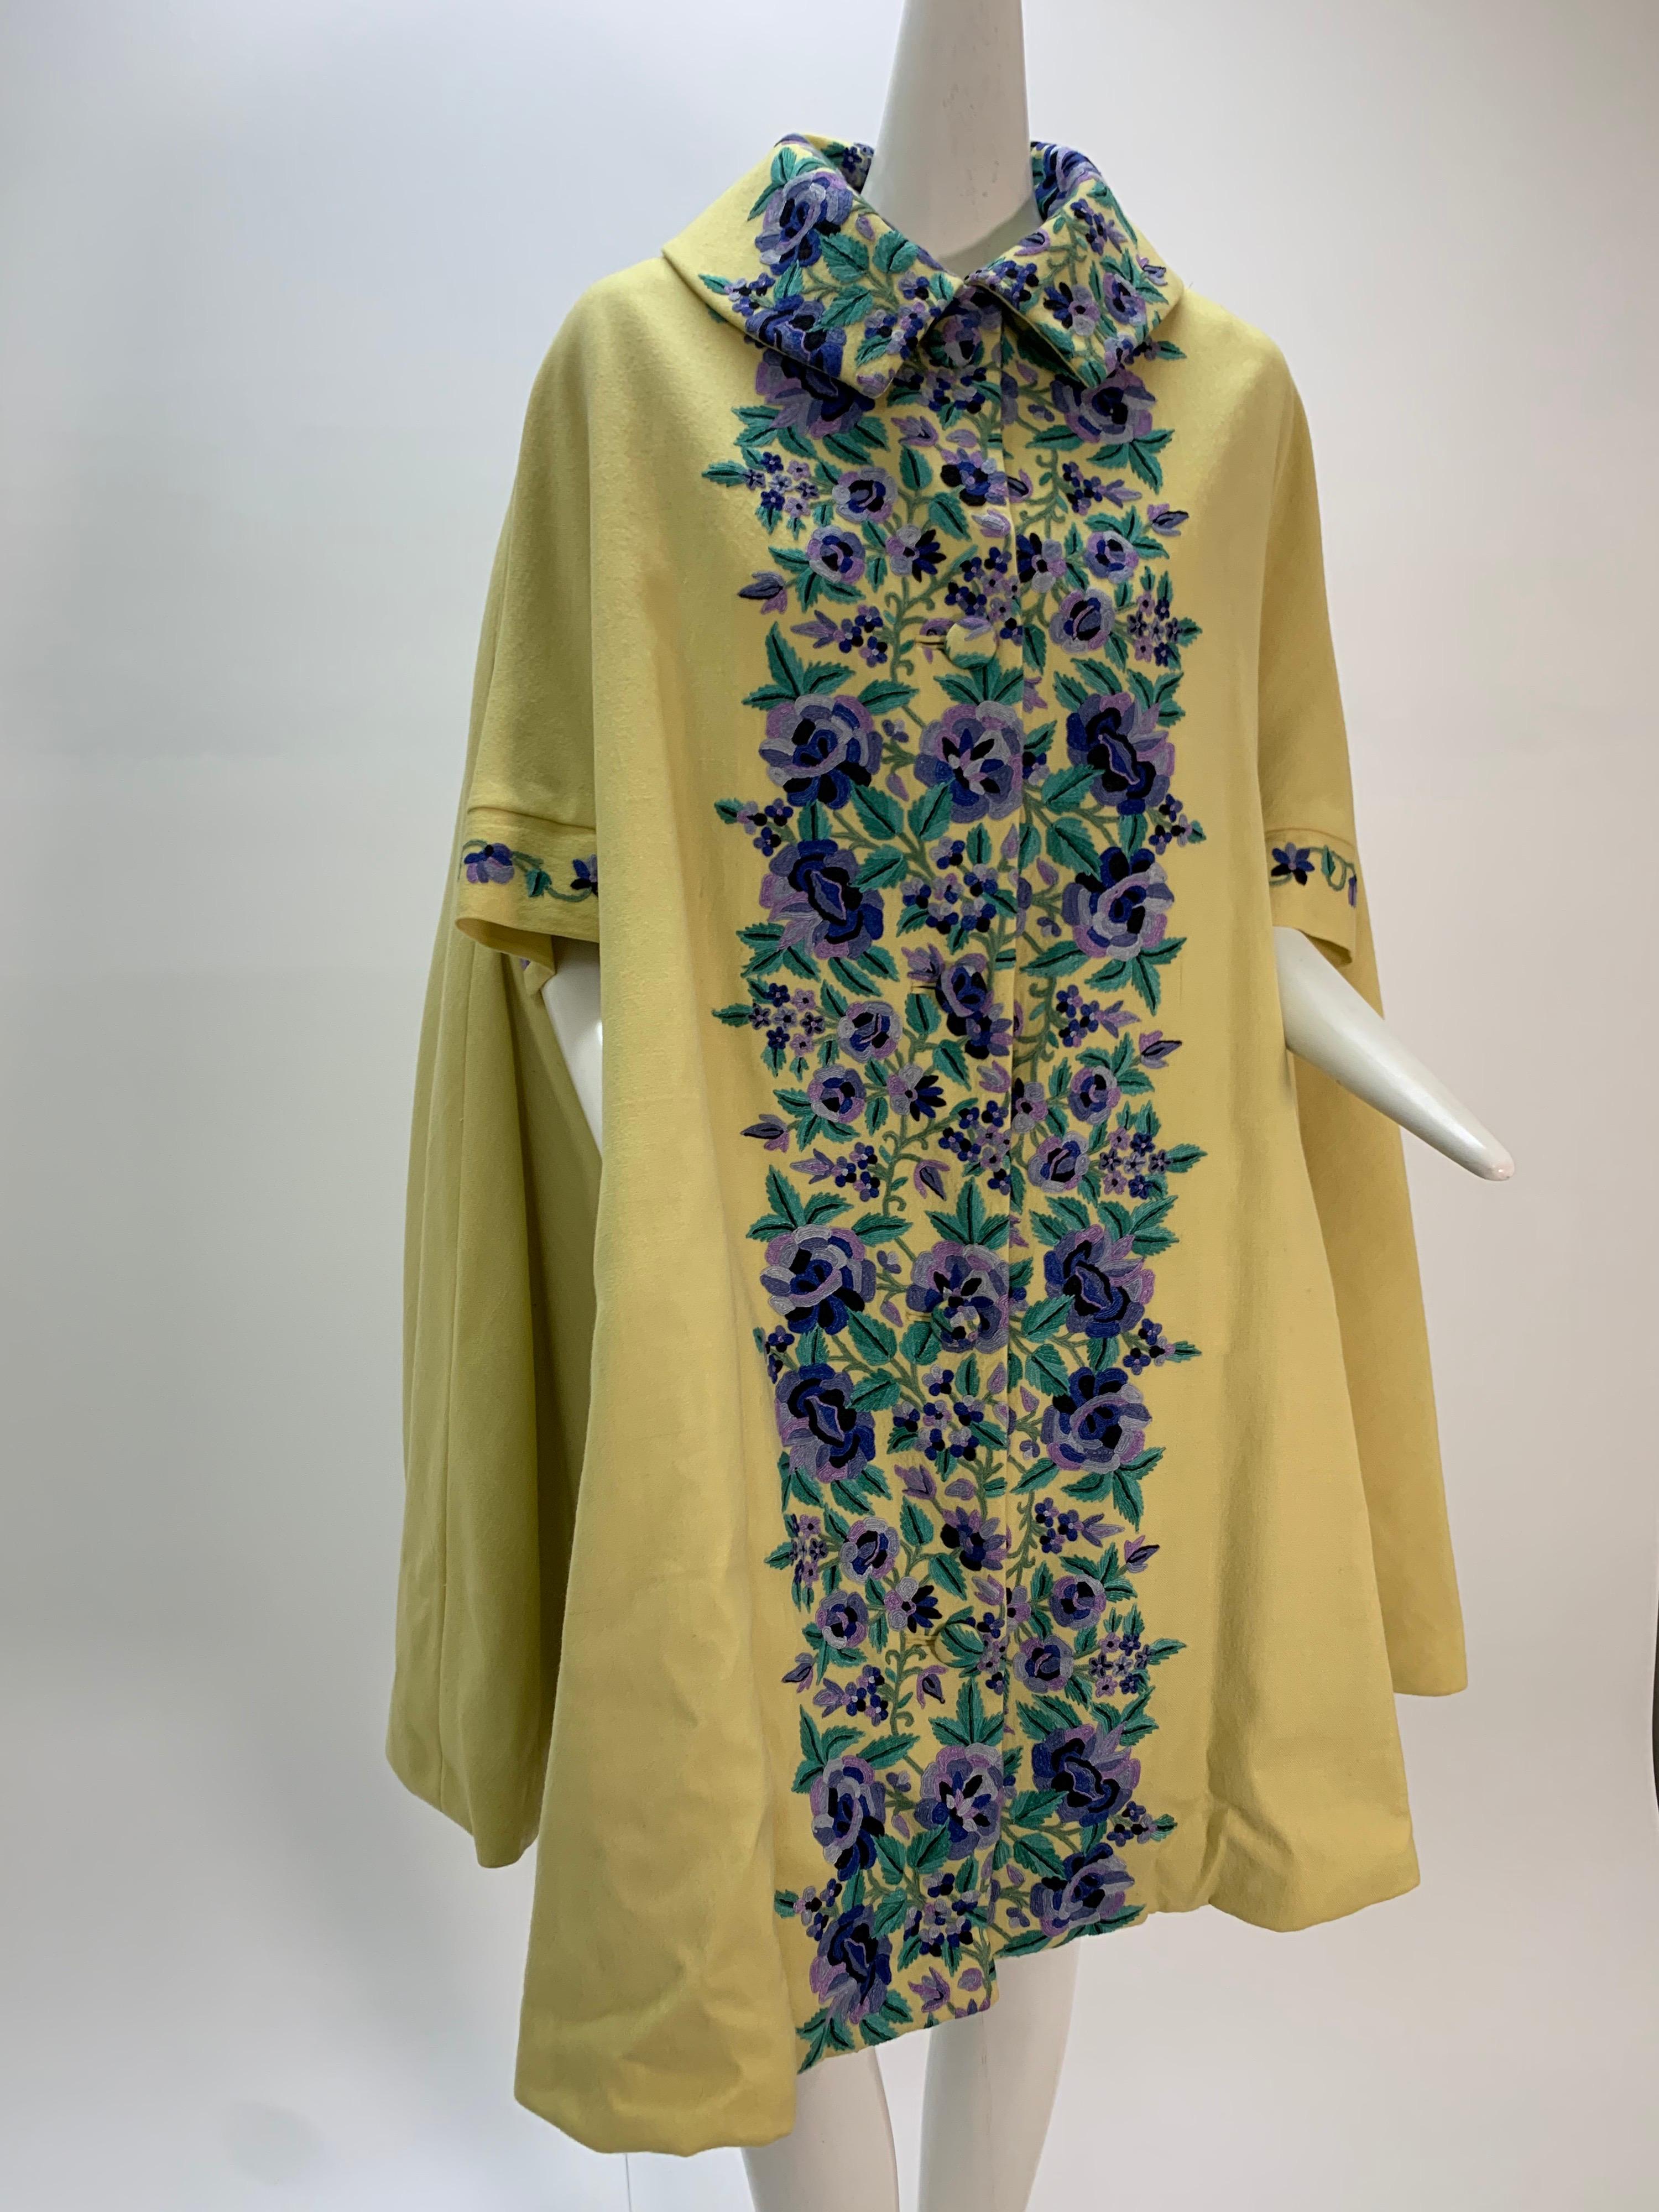 A gorgeous 1960s Profils Du Monde citrine color wool swing coat with beautiful lavender, indigo and green floral crewel embroidered floral panels at front. Lined in blue silk satin with a matching size 10-12 silk dress. 